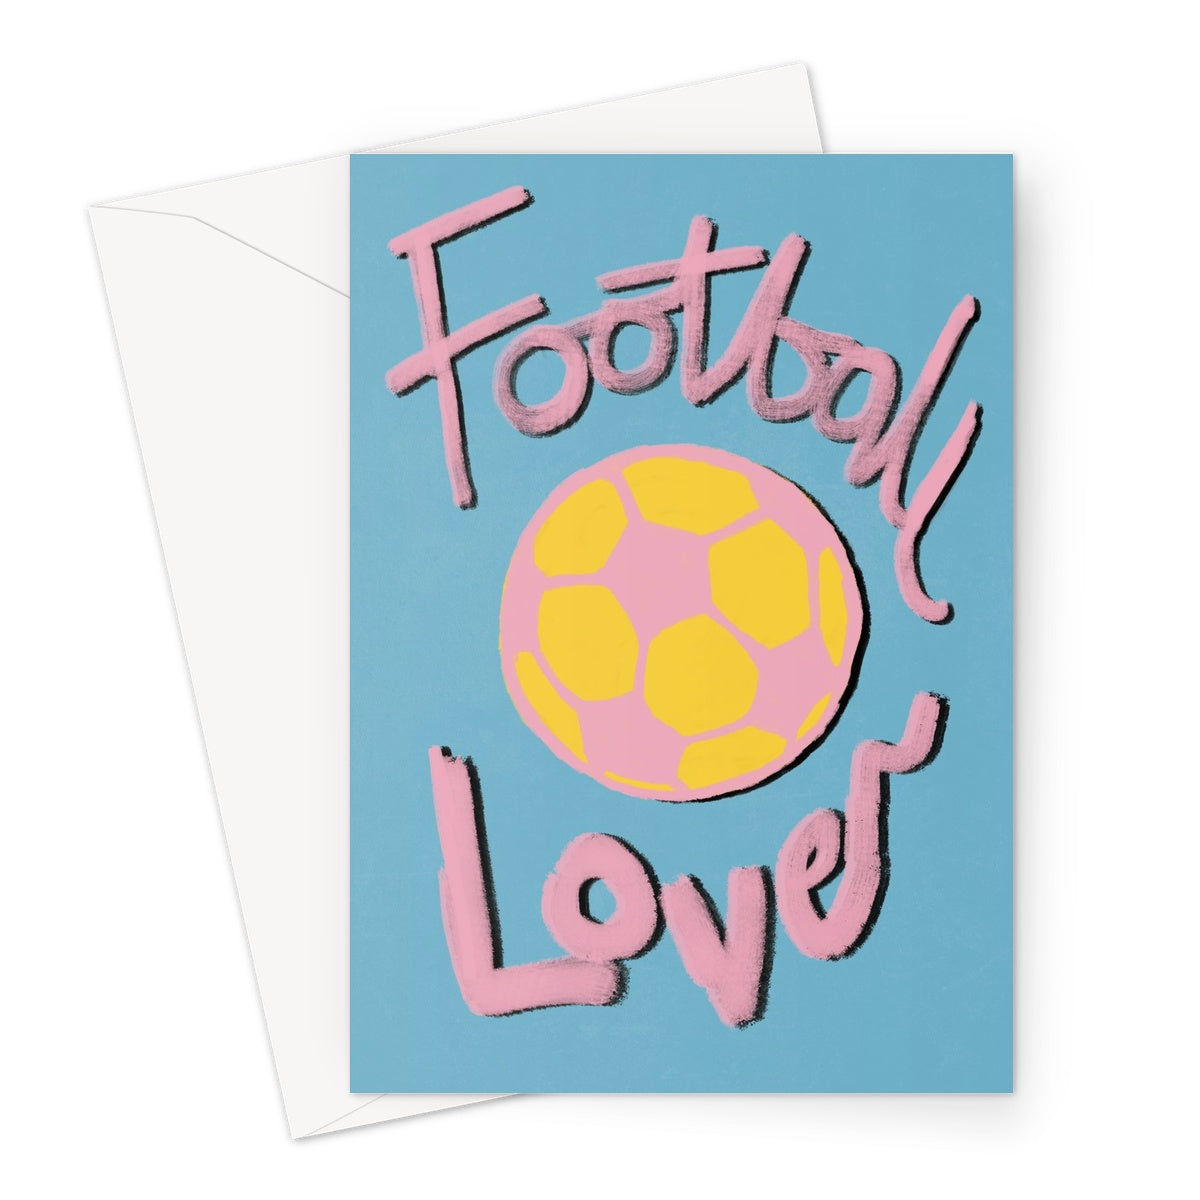 Football Lover Print - Blue, Yellow, Pink Greeting Card